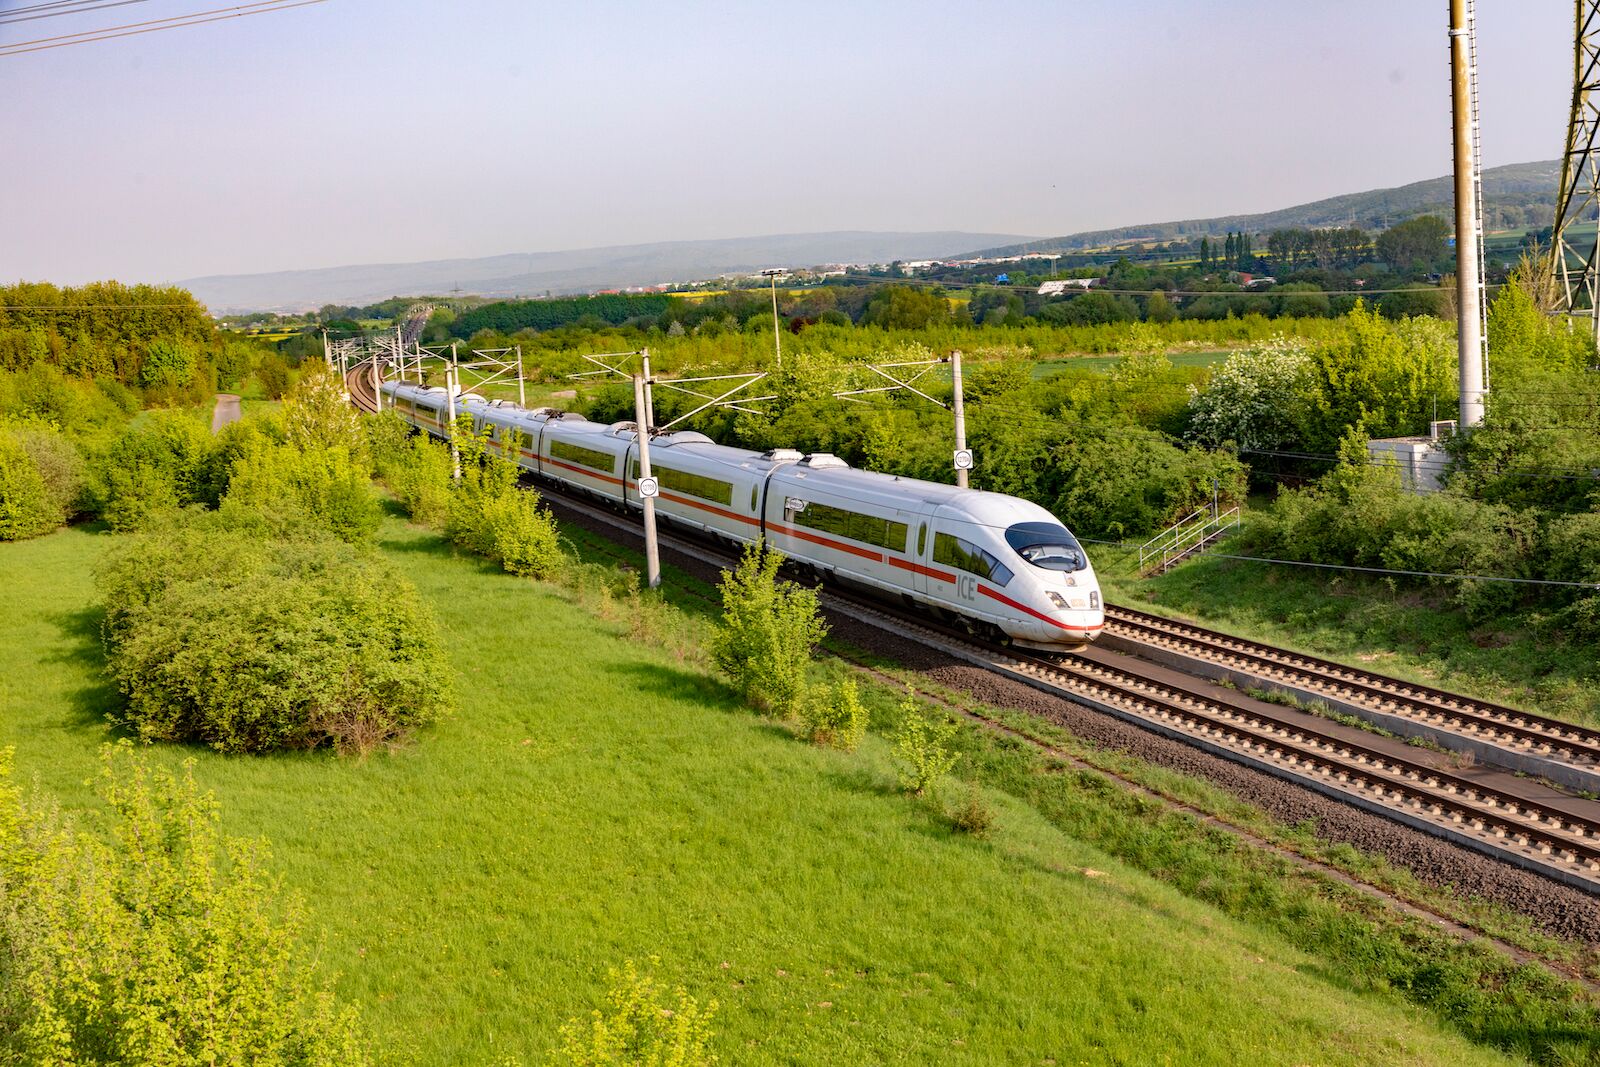 ICE 3 train operating in Germany. The ICE 3 train is the fastest train in Europe.